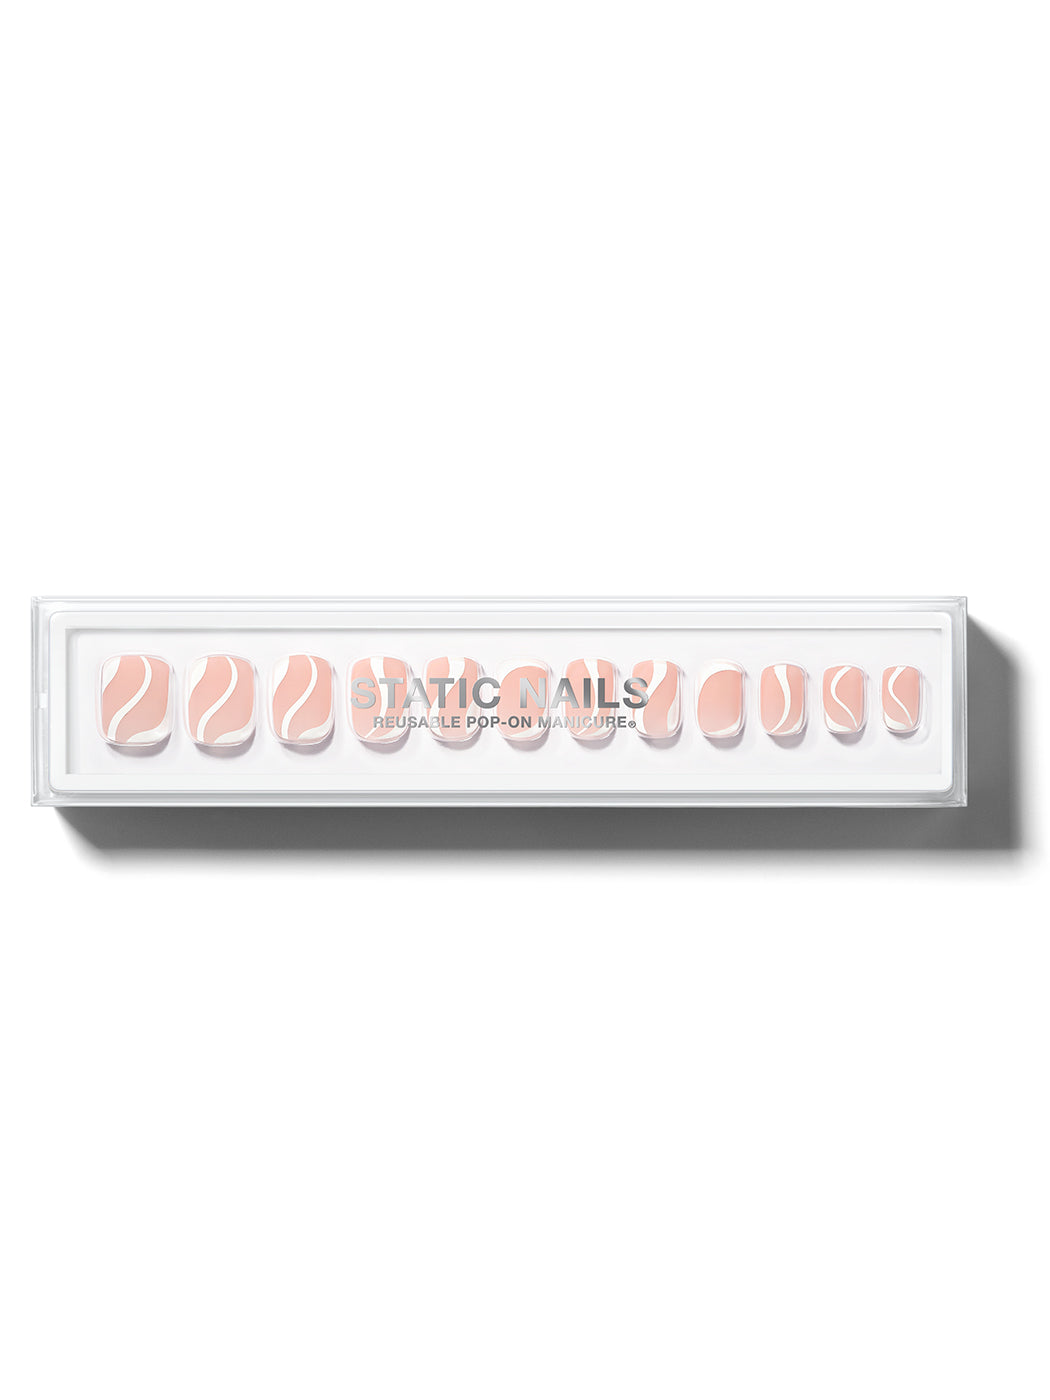 Nude base with white swirl design on all nails in short square shape,